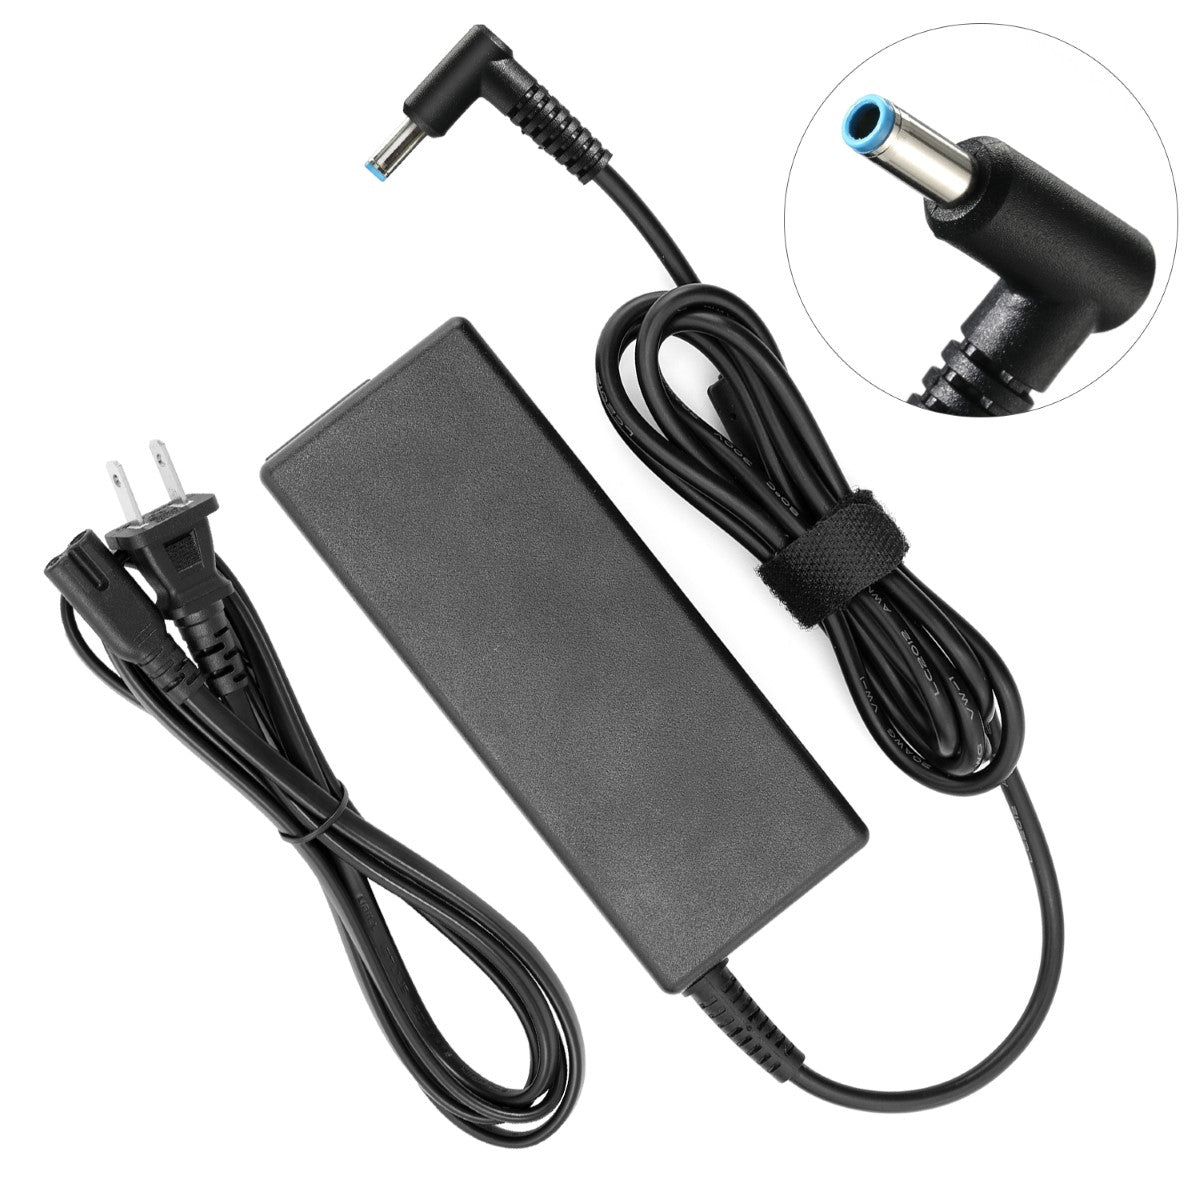 AC Adapter Charger for HP Pavilion Touchsmart 17-f024ng Notebook.